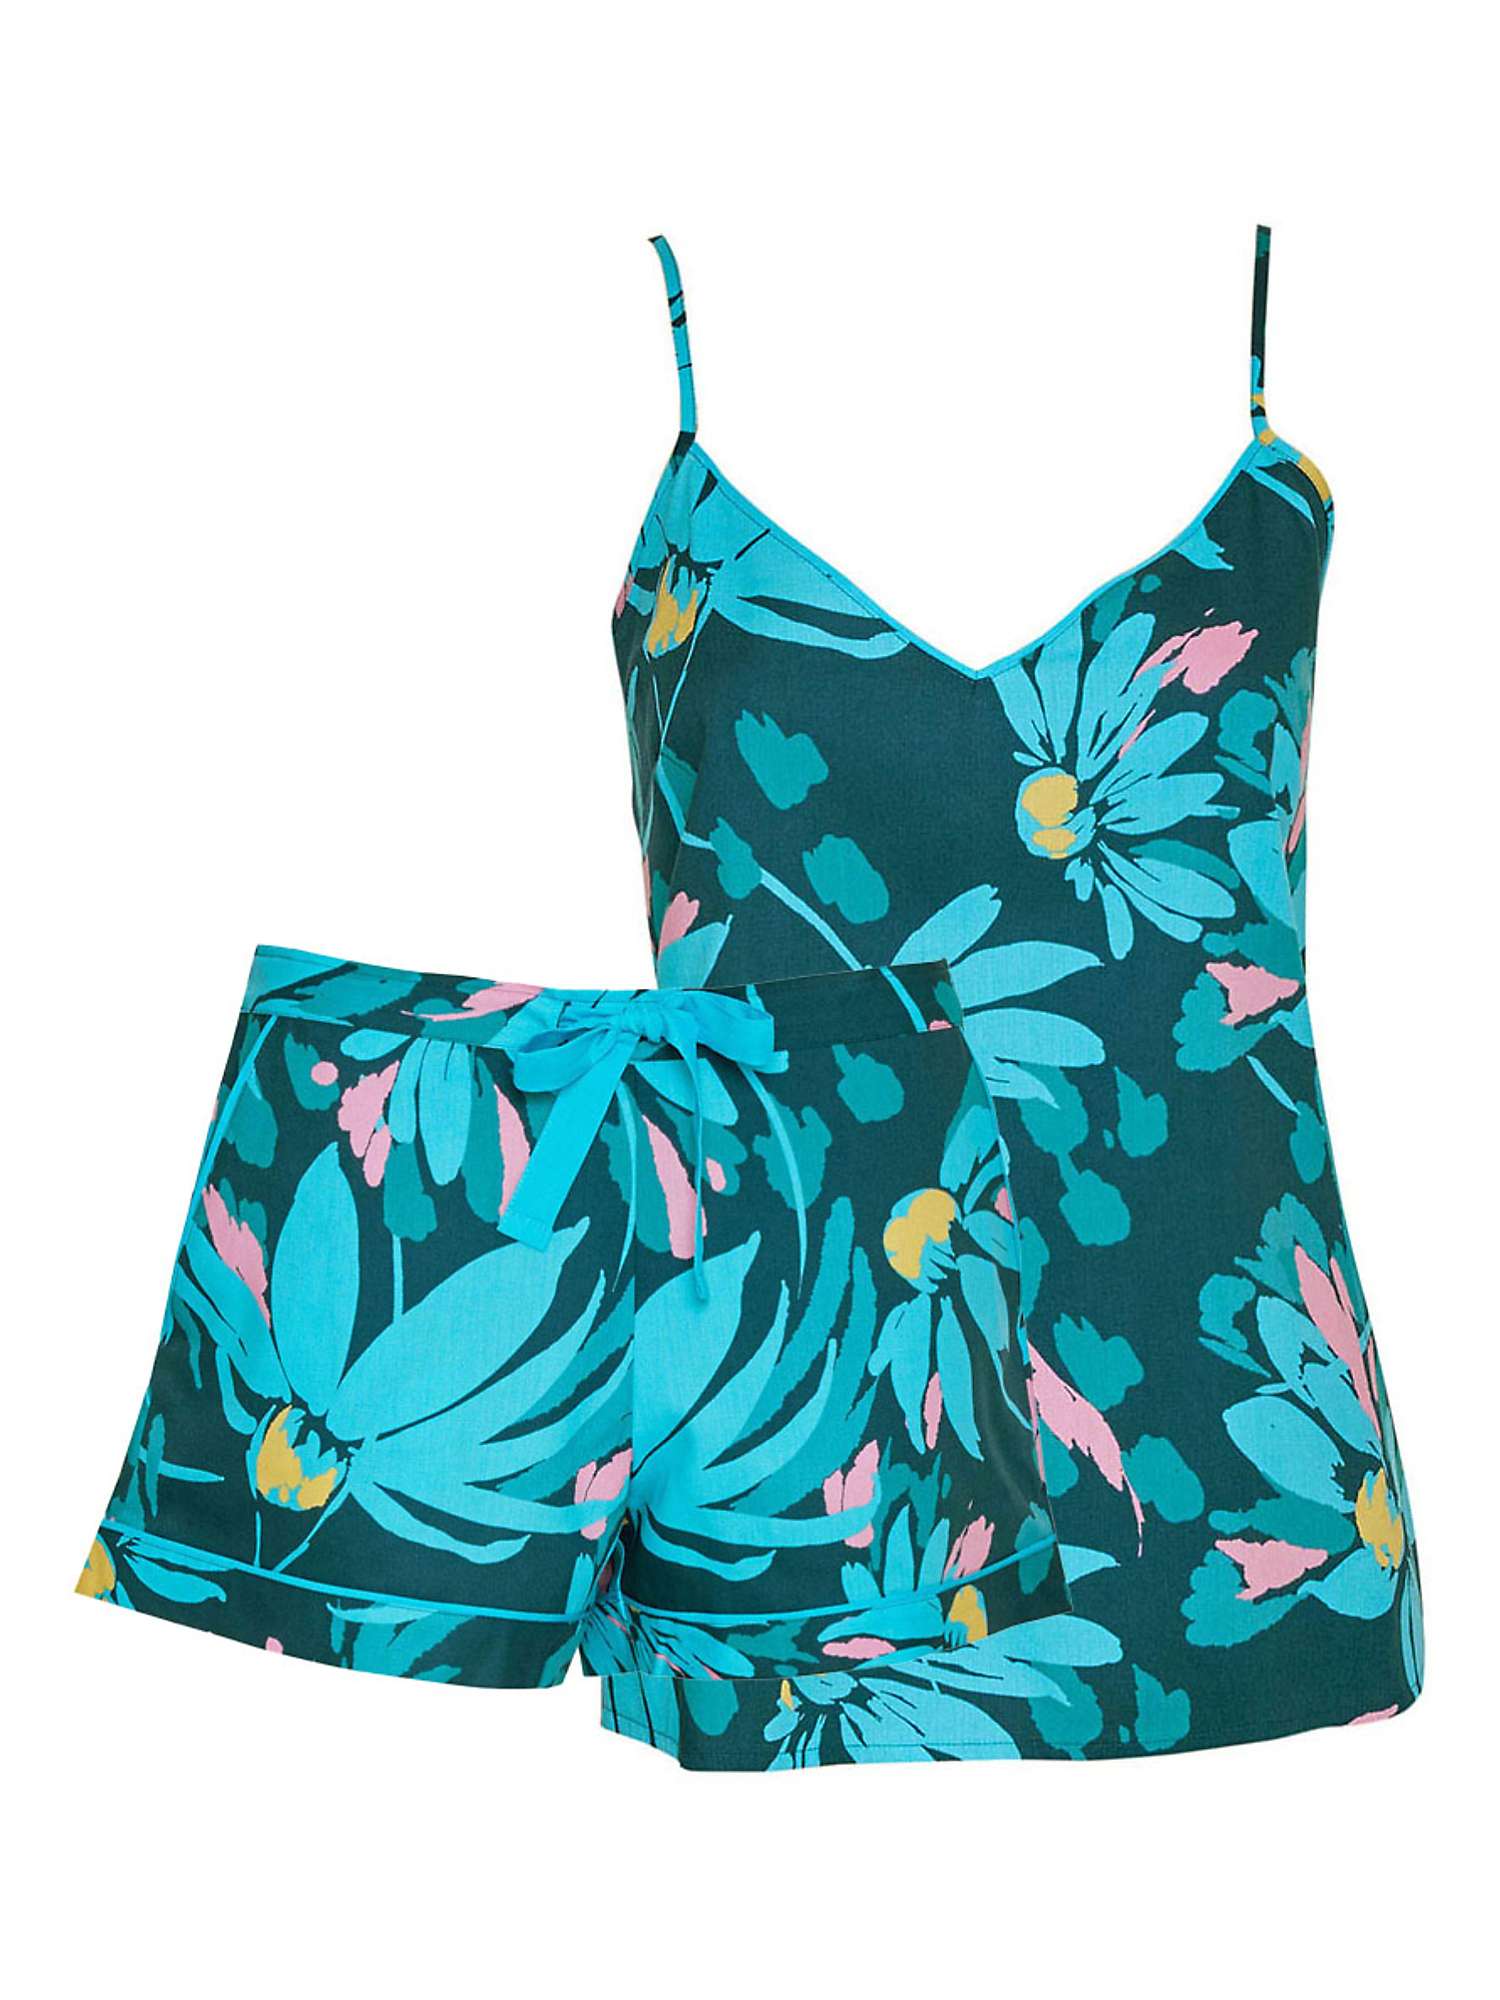 Buy Cyberjammies Cove Floral Cami and Shorts Pyjamas, Teal Online at johnlewis.com